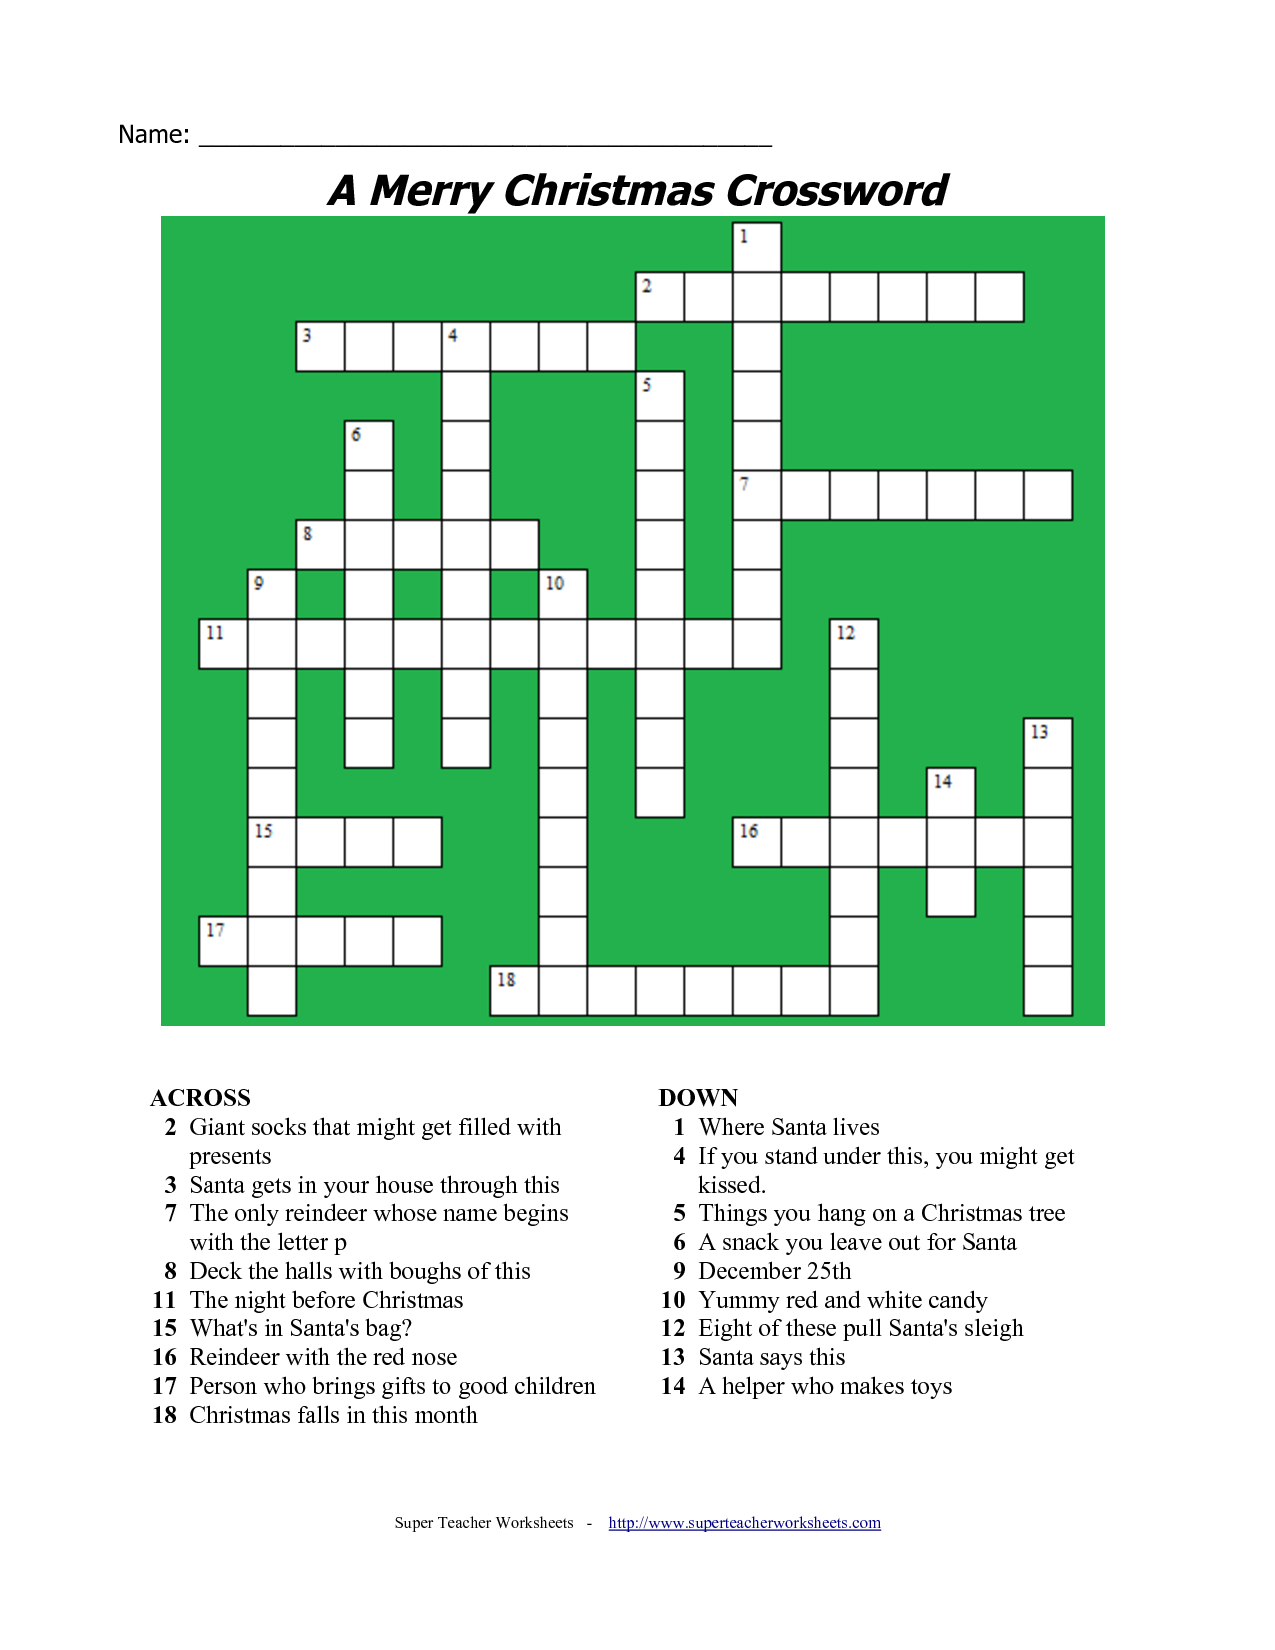 20 Fun Printable Christmas Crossword Puzzles | Kittybabylove - Free Printable Christmas Crossword Puzzles For Middle School